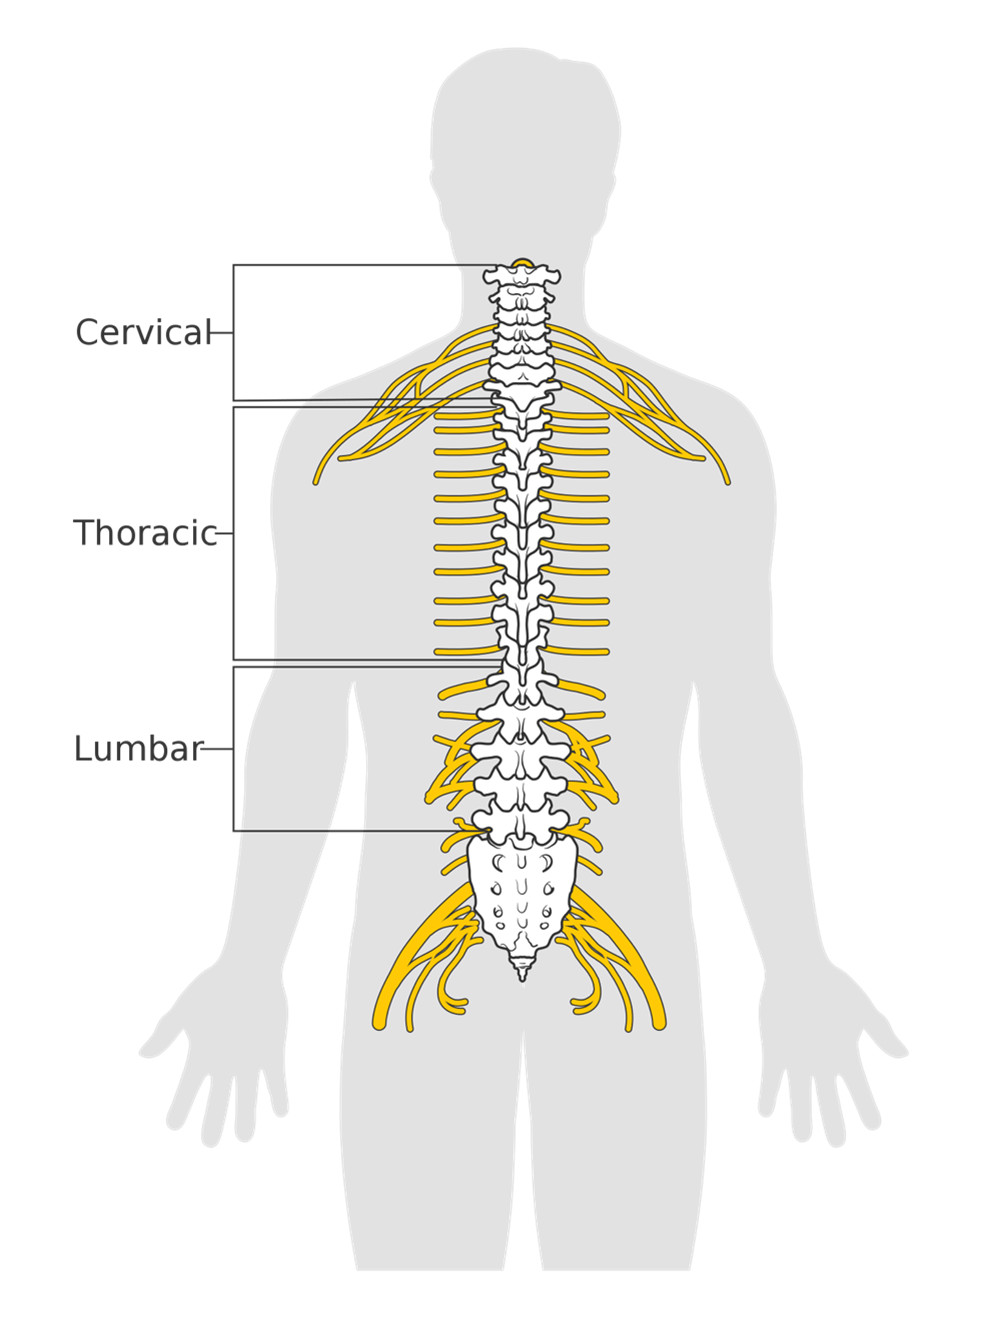 Diagram labeling three areas of the spine - cervical, thoracic, and lumbar.